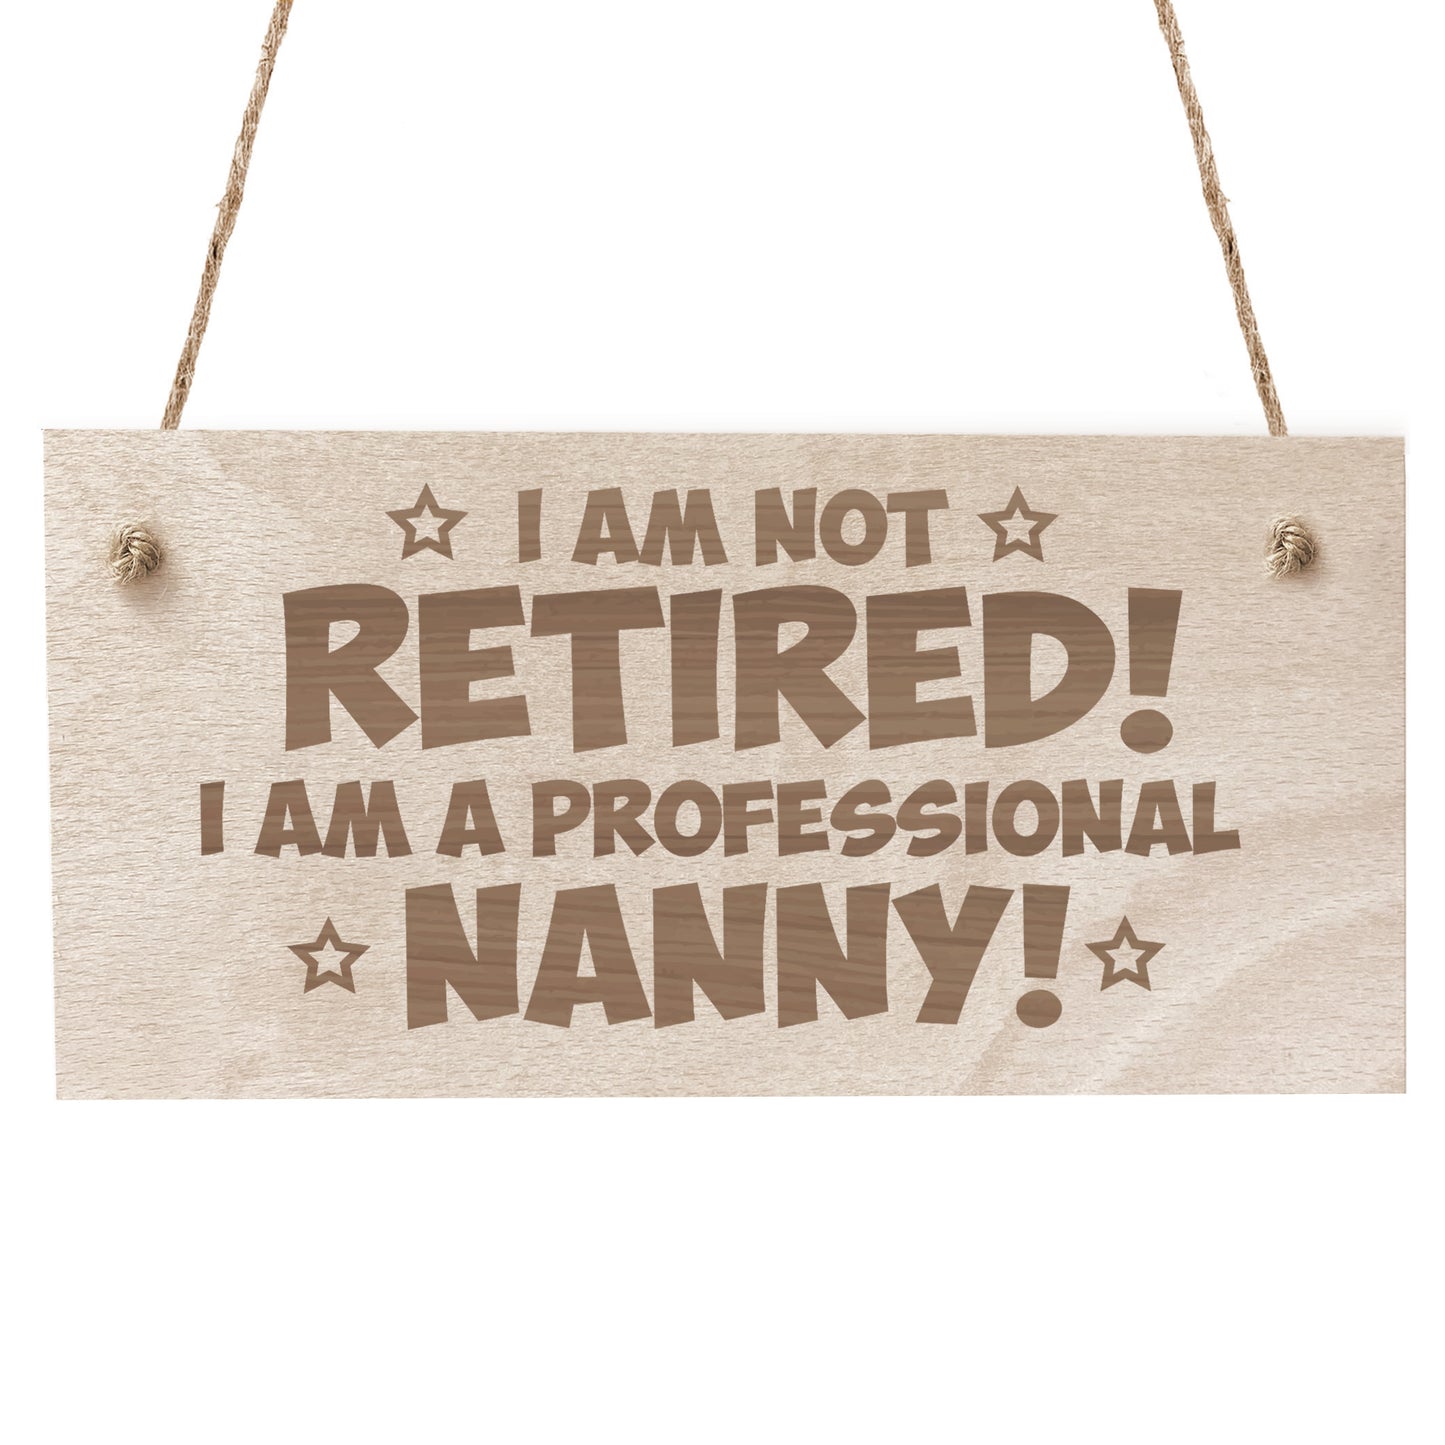 Funny Nanny Gifts Wooden Engraved Plaque Birthday Christmas Gift